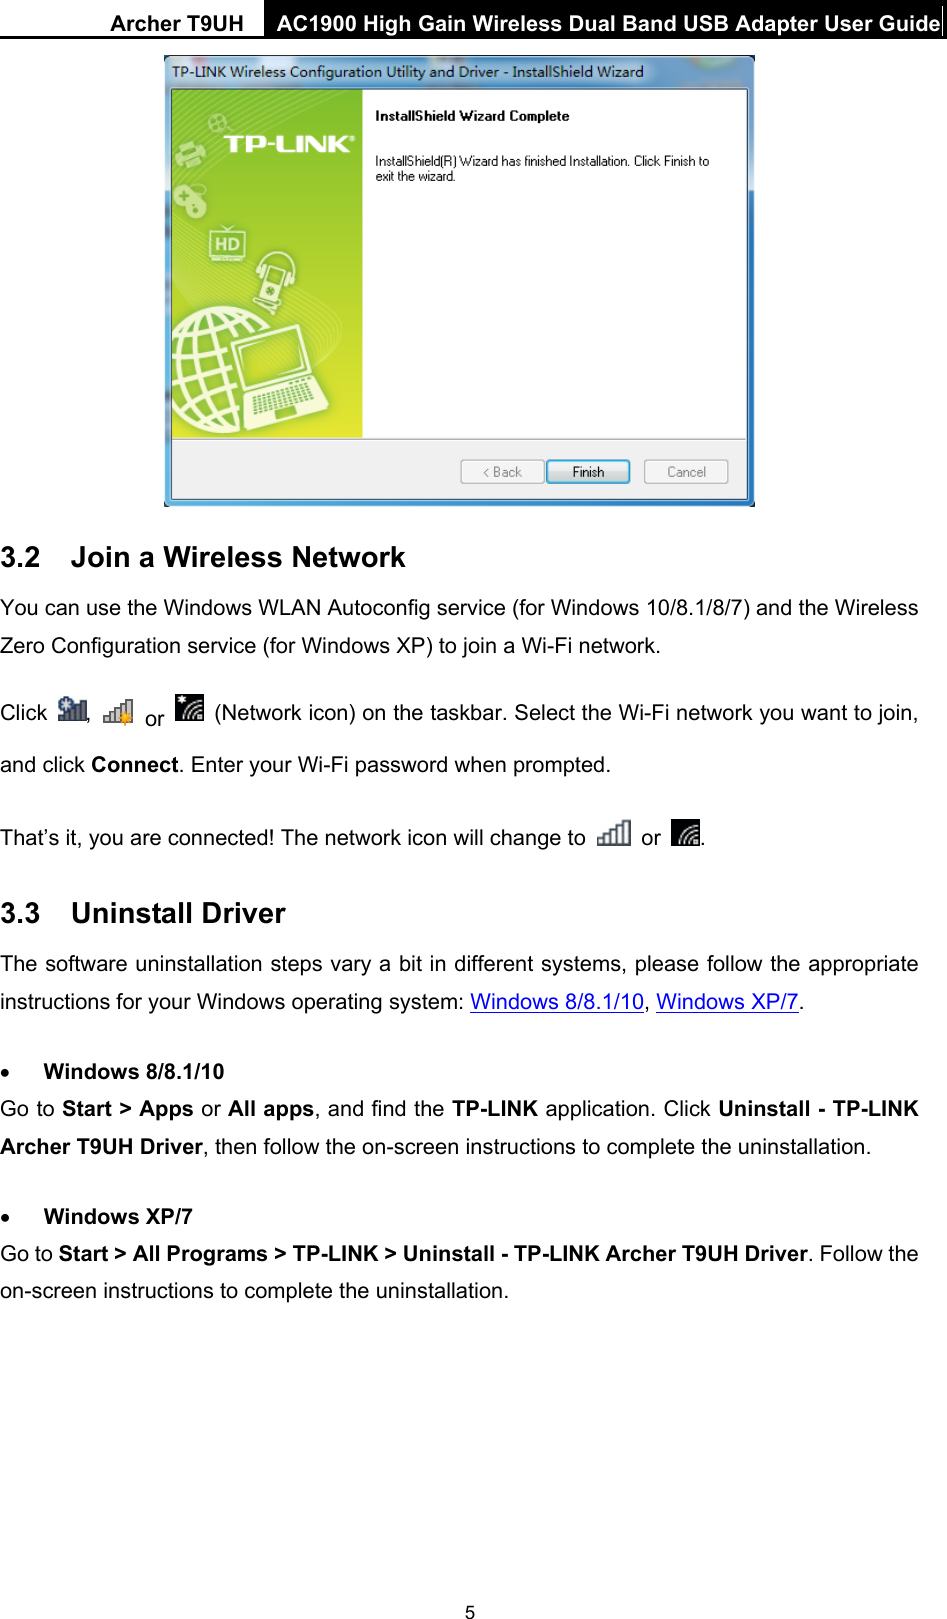 Archer T9UH  AC1900 High Gain Wireless Dual Band USB Adapter User Guide 5   3.2  Join a Wireless Network You can use the Windows WLAN Autoconfig service (for Windows 10/8.1/8/7) and the Wireless Zero Configuration service (for Windows XP) to join a Wi-Fi network. Click  ,   or  (Network icon) on the taskbar. Select the Wi-Fi network you want to join, and click Connect. Enter your Wi-Fi password when prompted. That’s it, you are connected! The network icon will change to   or  . 3.3  Uninstall Driver The software uninstallation steps vary a bit in different systems, please follow the appropriate instructions for your Windows operating system: Windows 8/8.1/10, Windows XP/7.  Windows 8/8.1/10 Go to Start &gt; Apps or All apps, and find the TP-LINK application. Click Uninstall - TP-LINK Archer T9UH Driver, then follow the on-screen instructions to complete the uninstallation.  Windows XP/7 Go to Start &gt; All Programs &gt; TP-LINK &gt; Uninstall - TP-LINK Archer T9UH Driver. Follow the on-screen instructions to complete the uninstallation. 